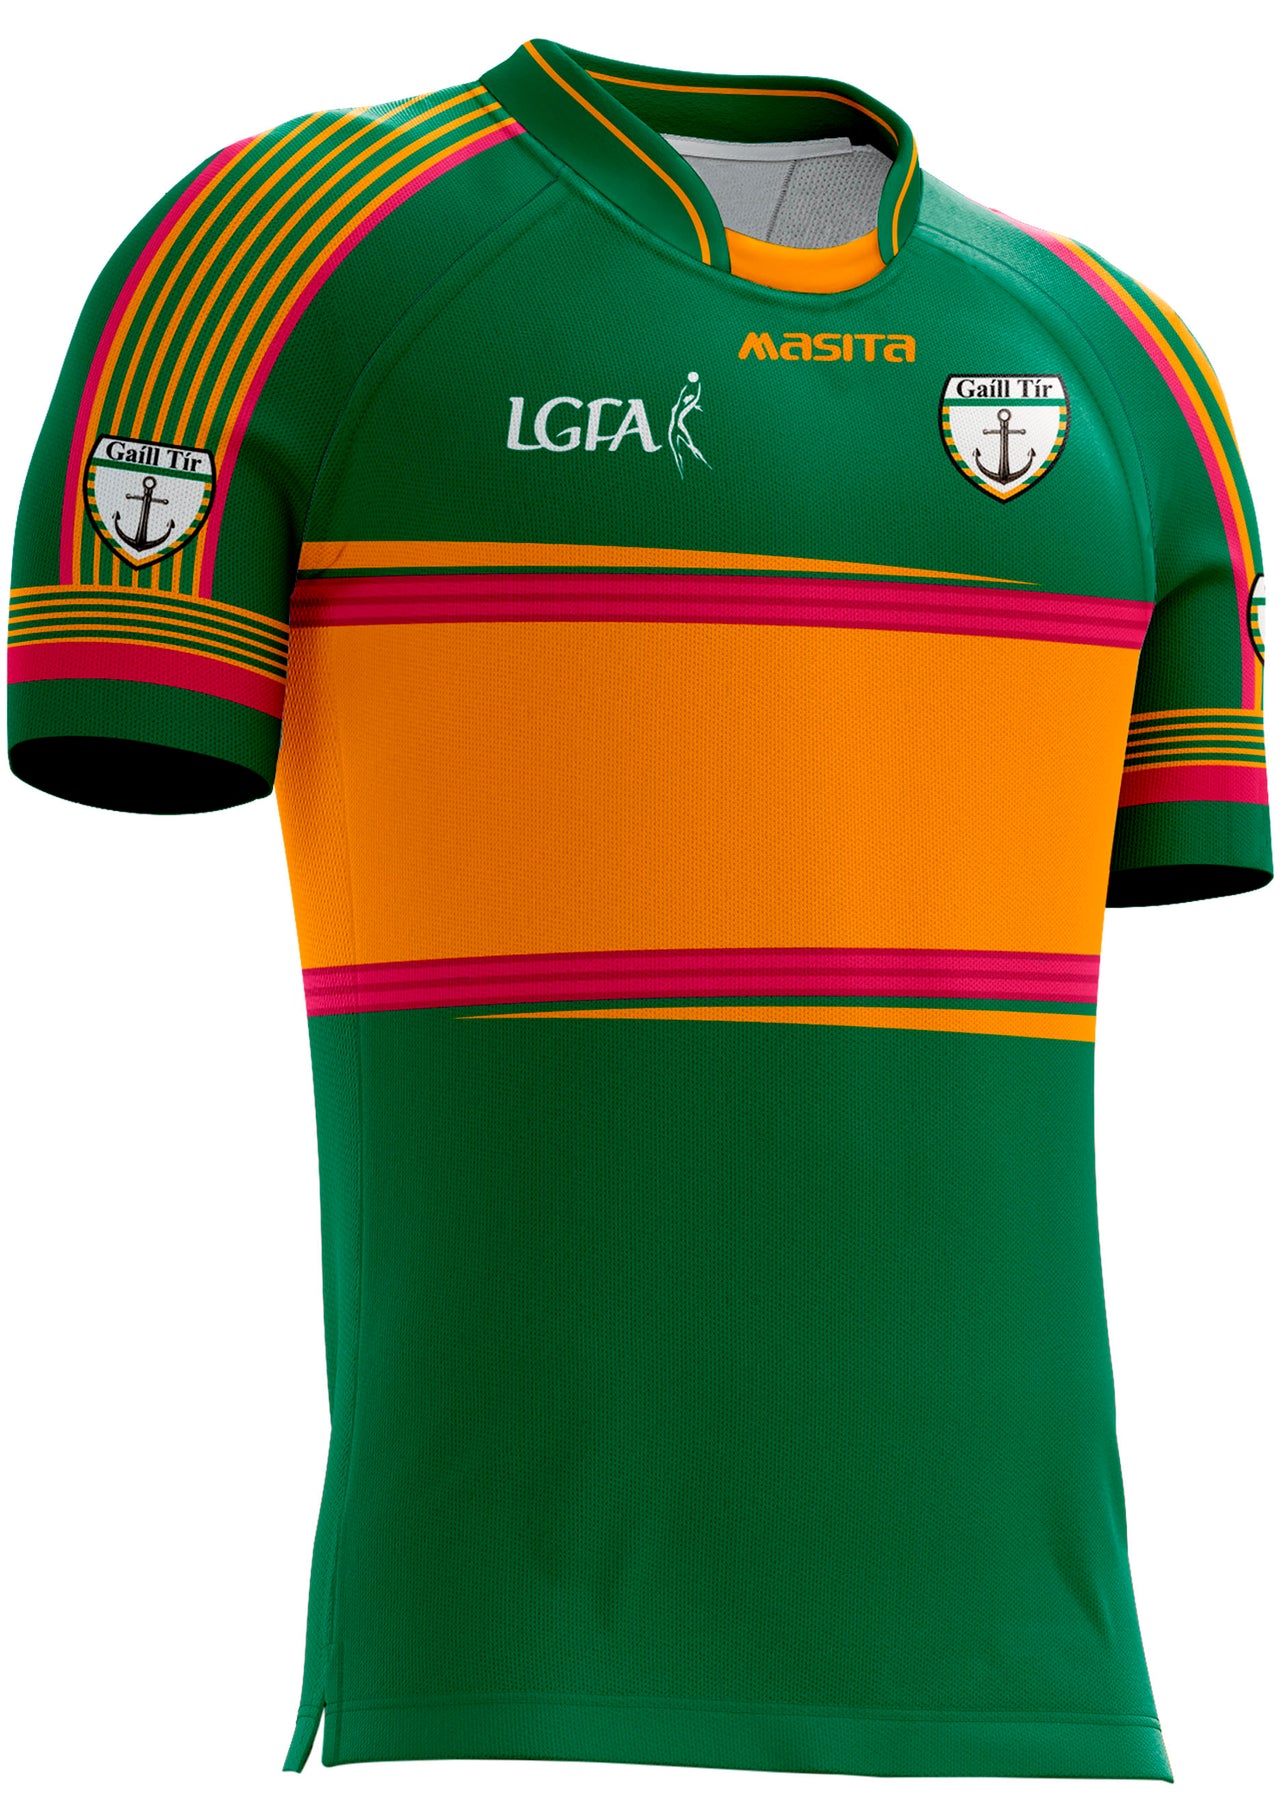 Gaultier LGFA Home Jersey Player Fit Adult